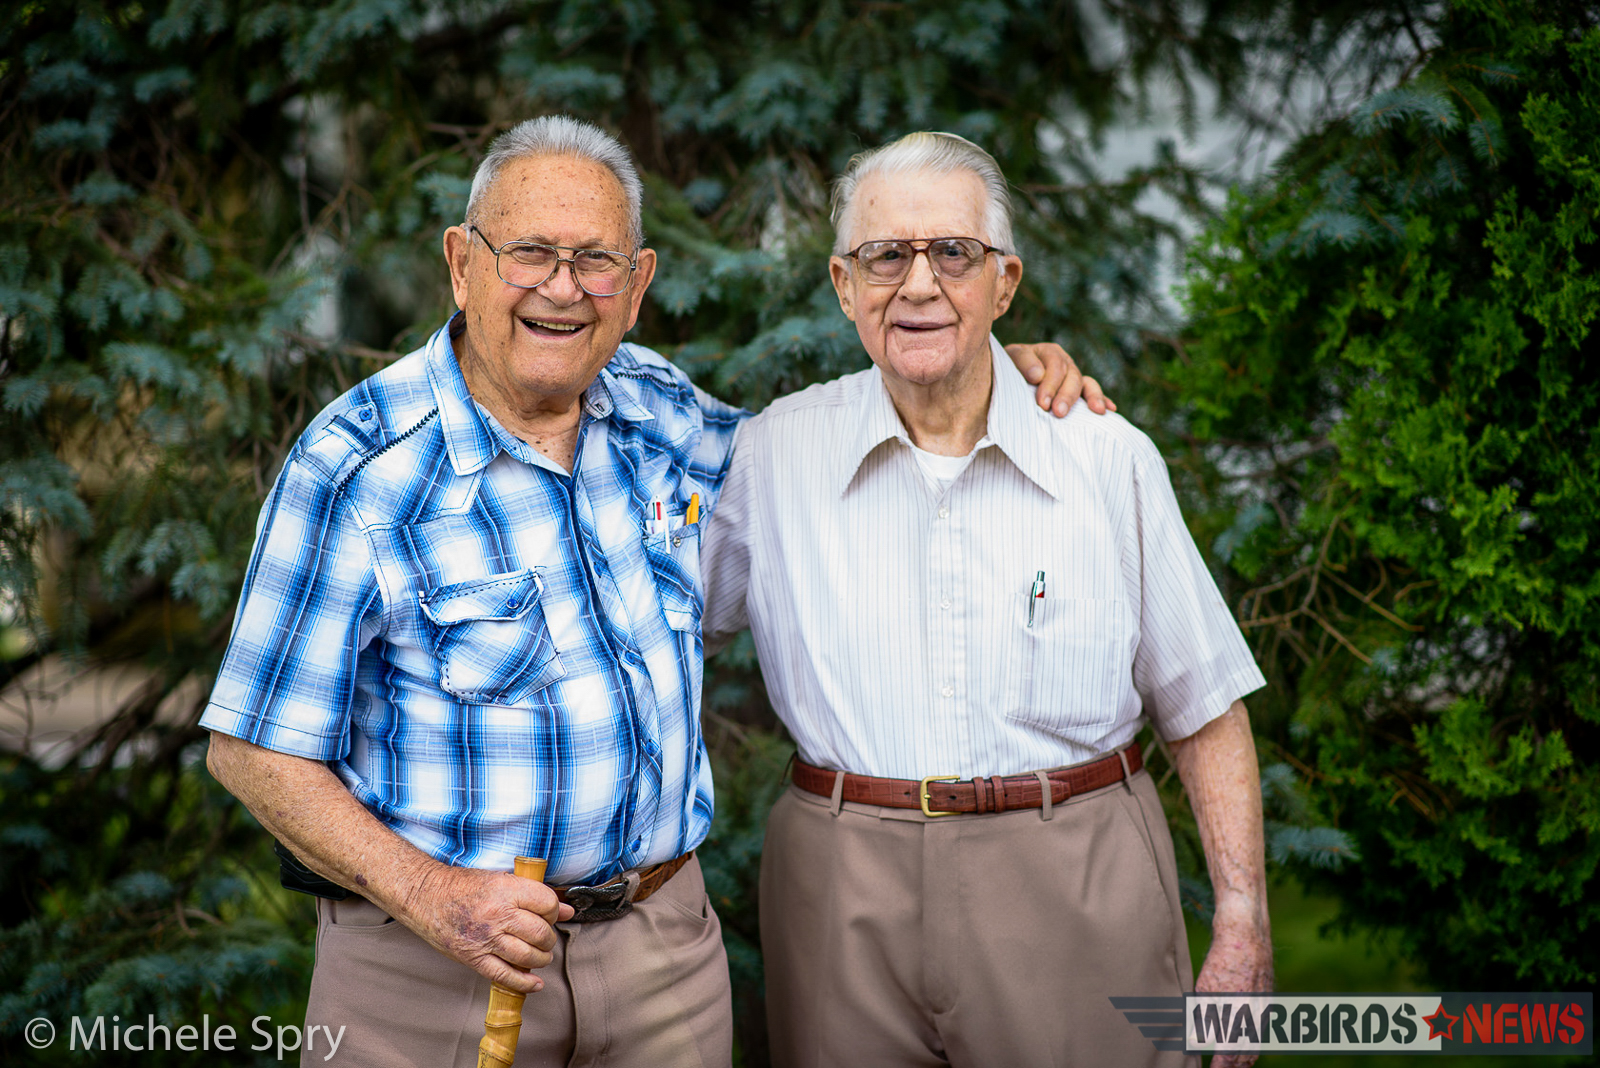 The two men 72 years later. (photo by Michele Spry)